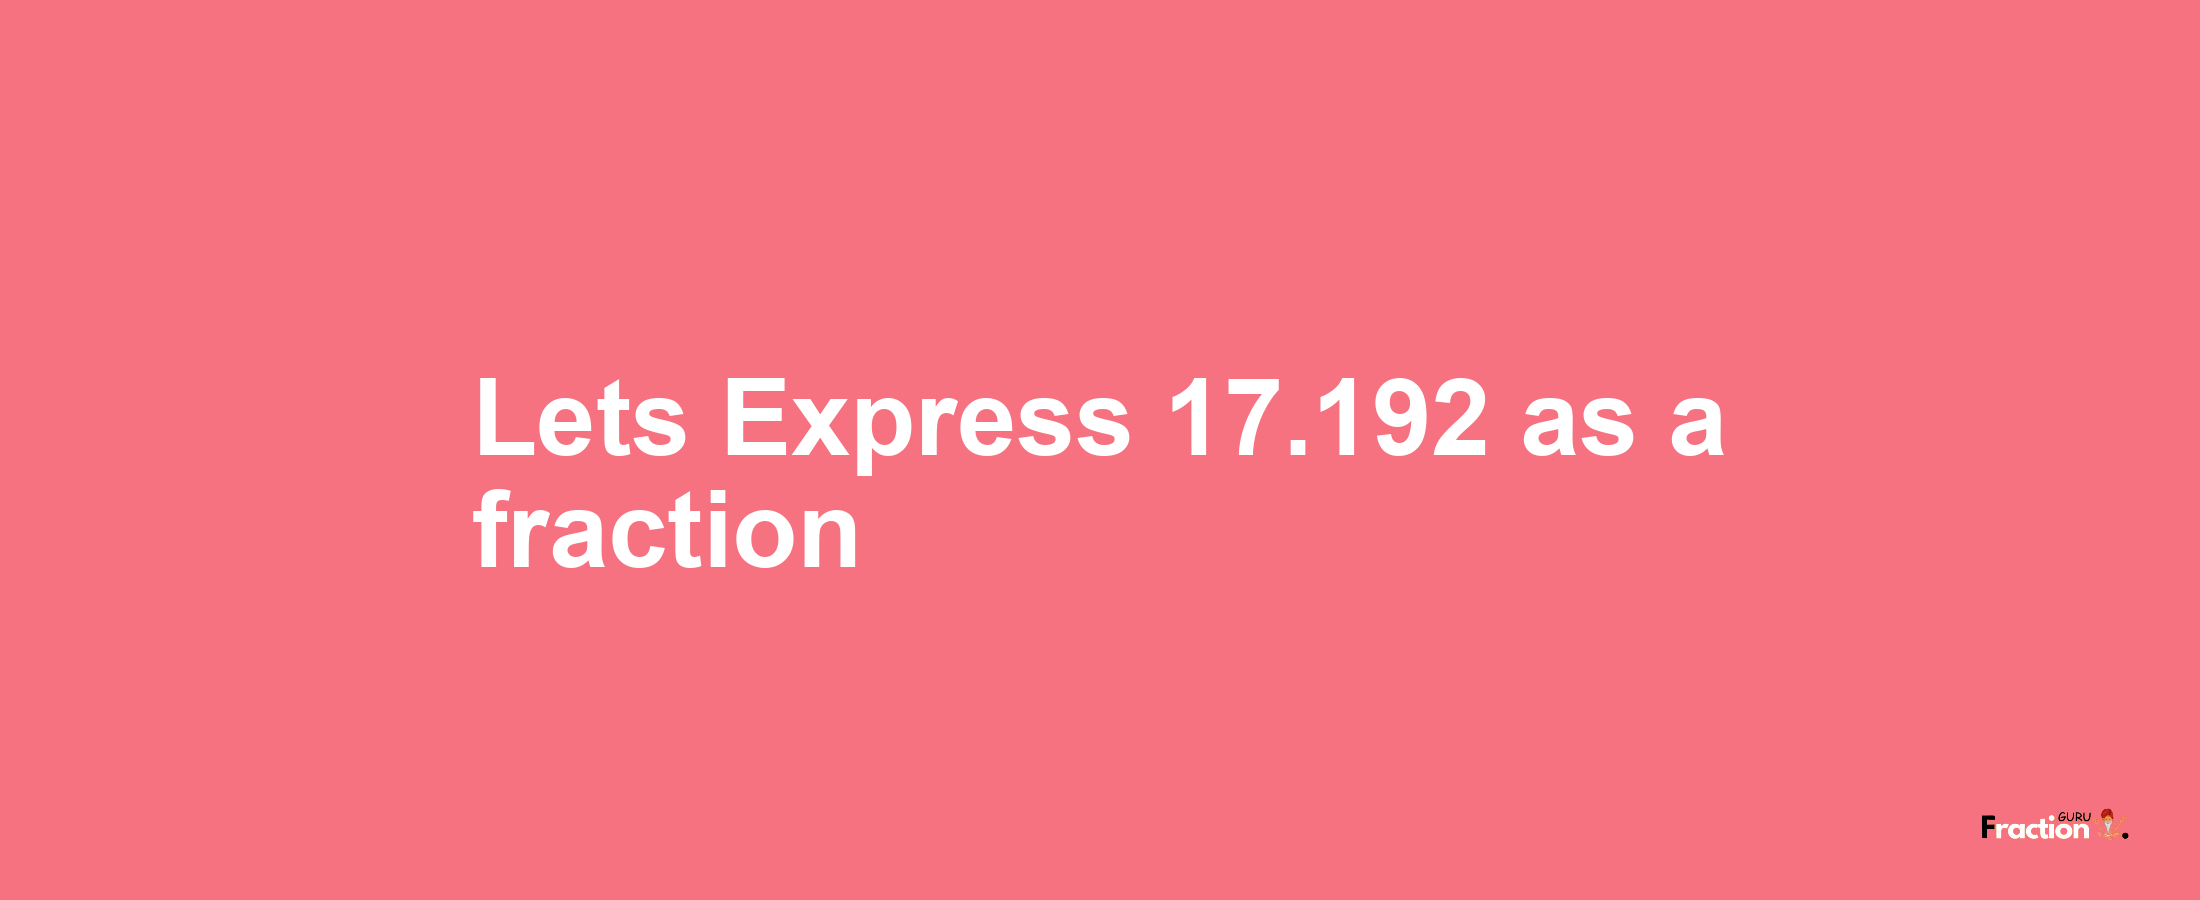 Lets Express 17.192 as afraction